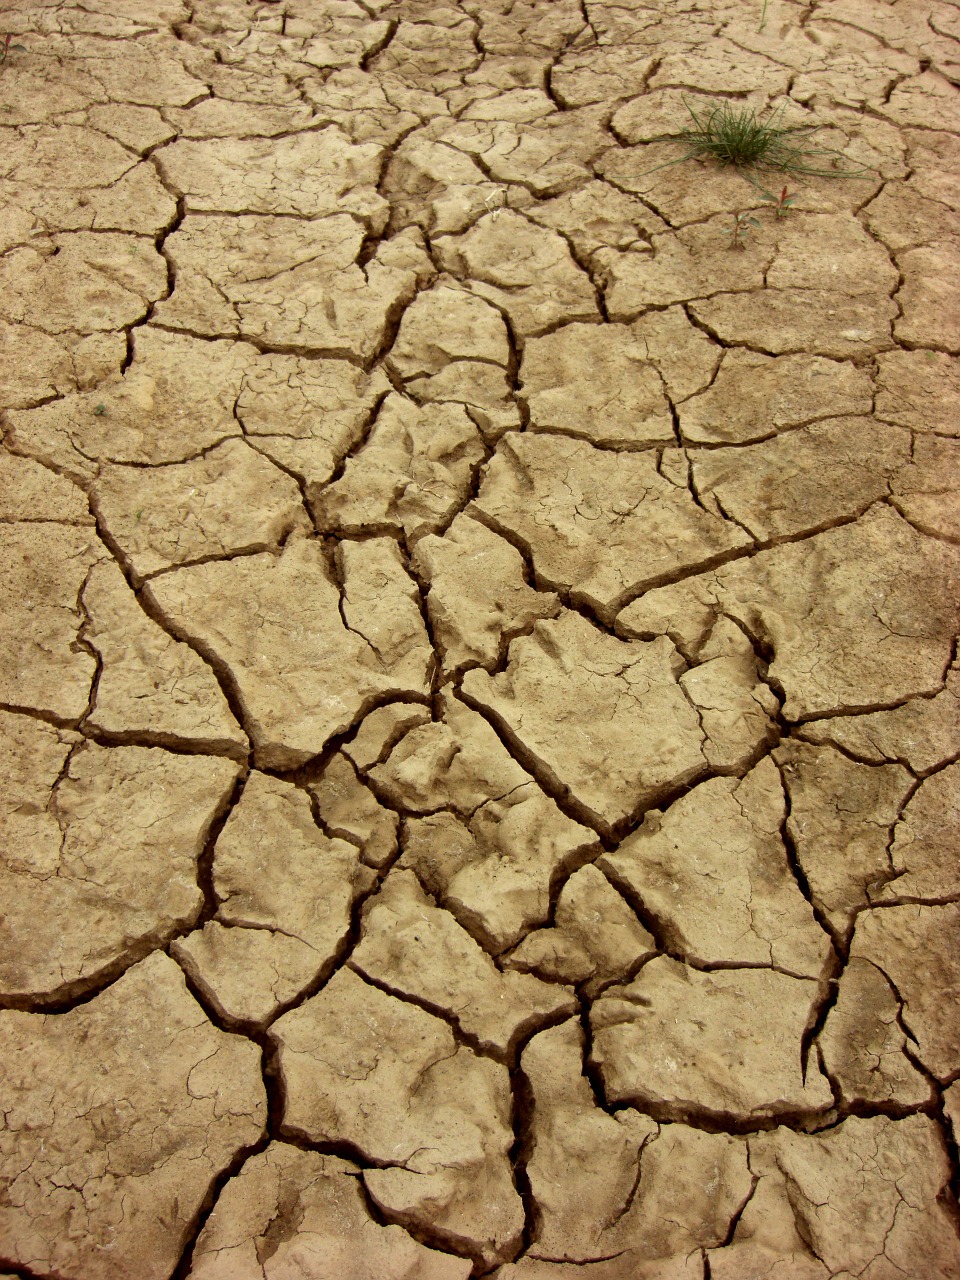 dry earth dehydrated free photo